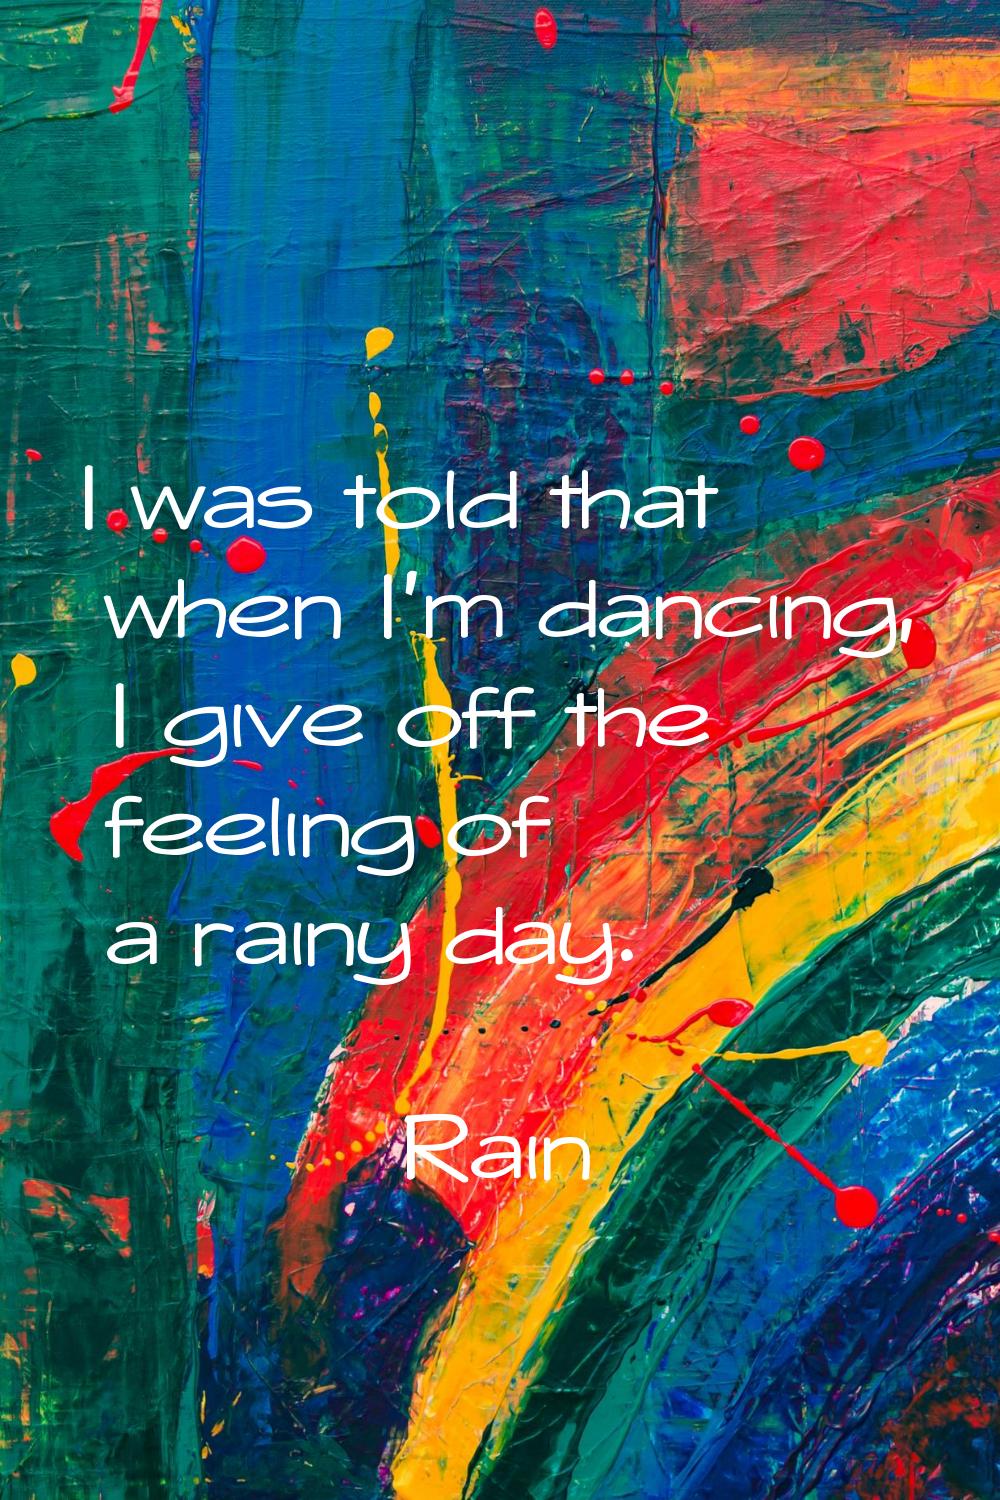 I was told that when I'm dancing, I give off the feeling of a rainy day.